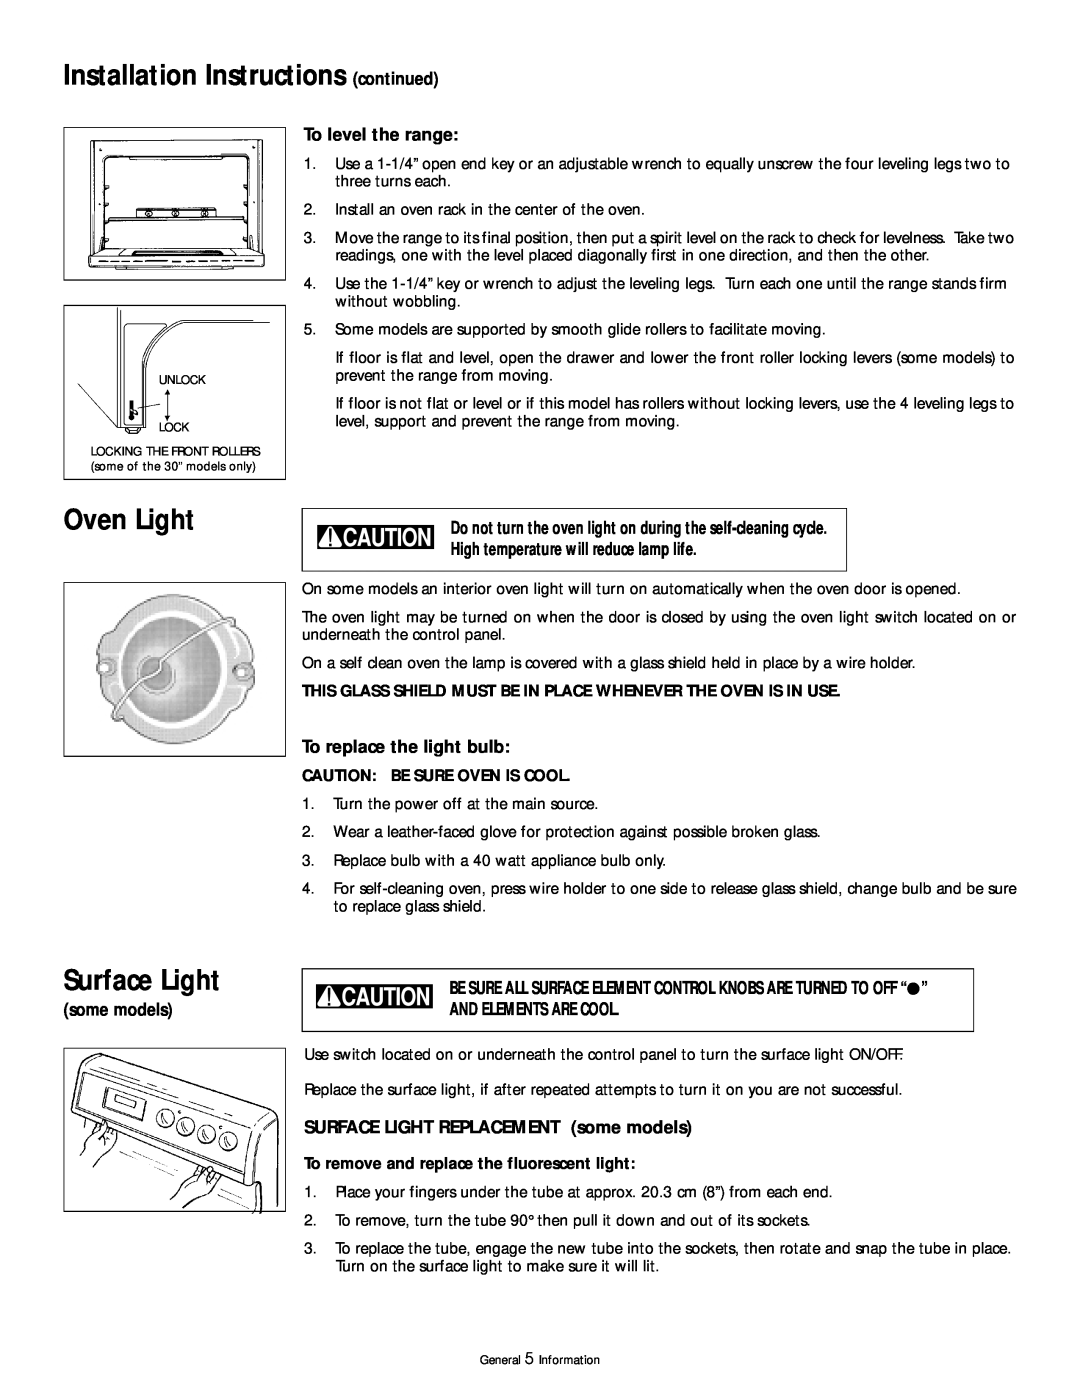 Tappan 318200409 warranty Installation Instructions continued, Oven Light, Surface Light, To level the range, some models 